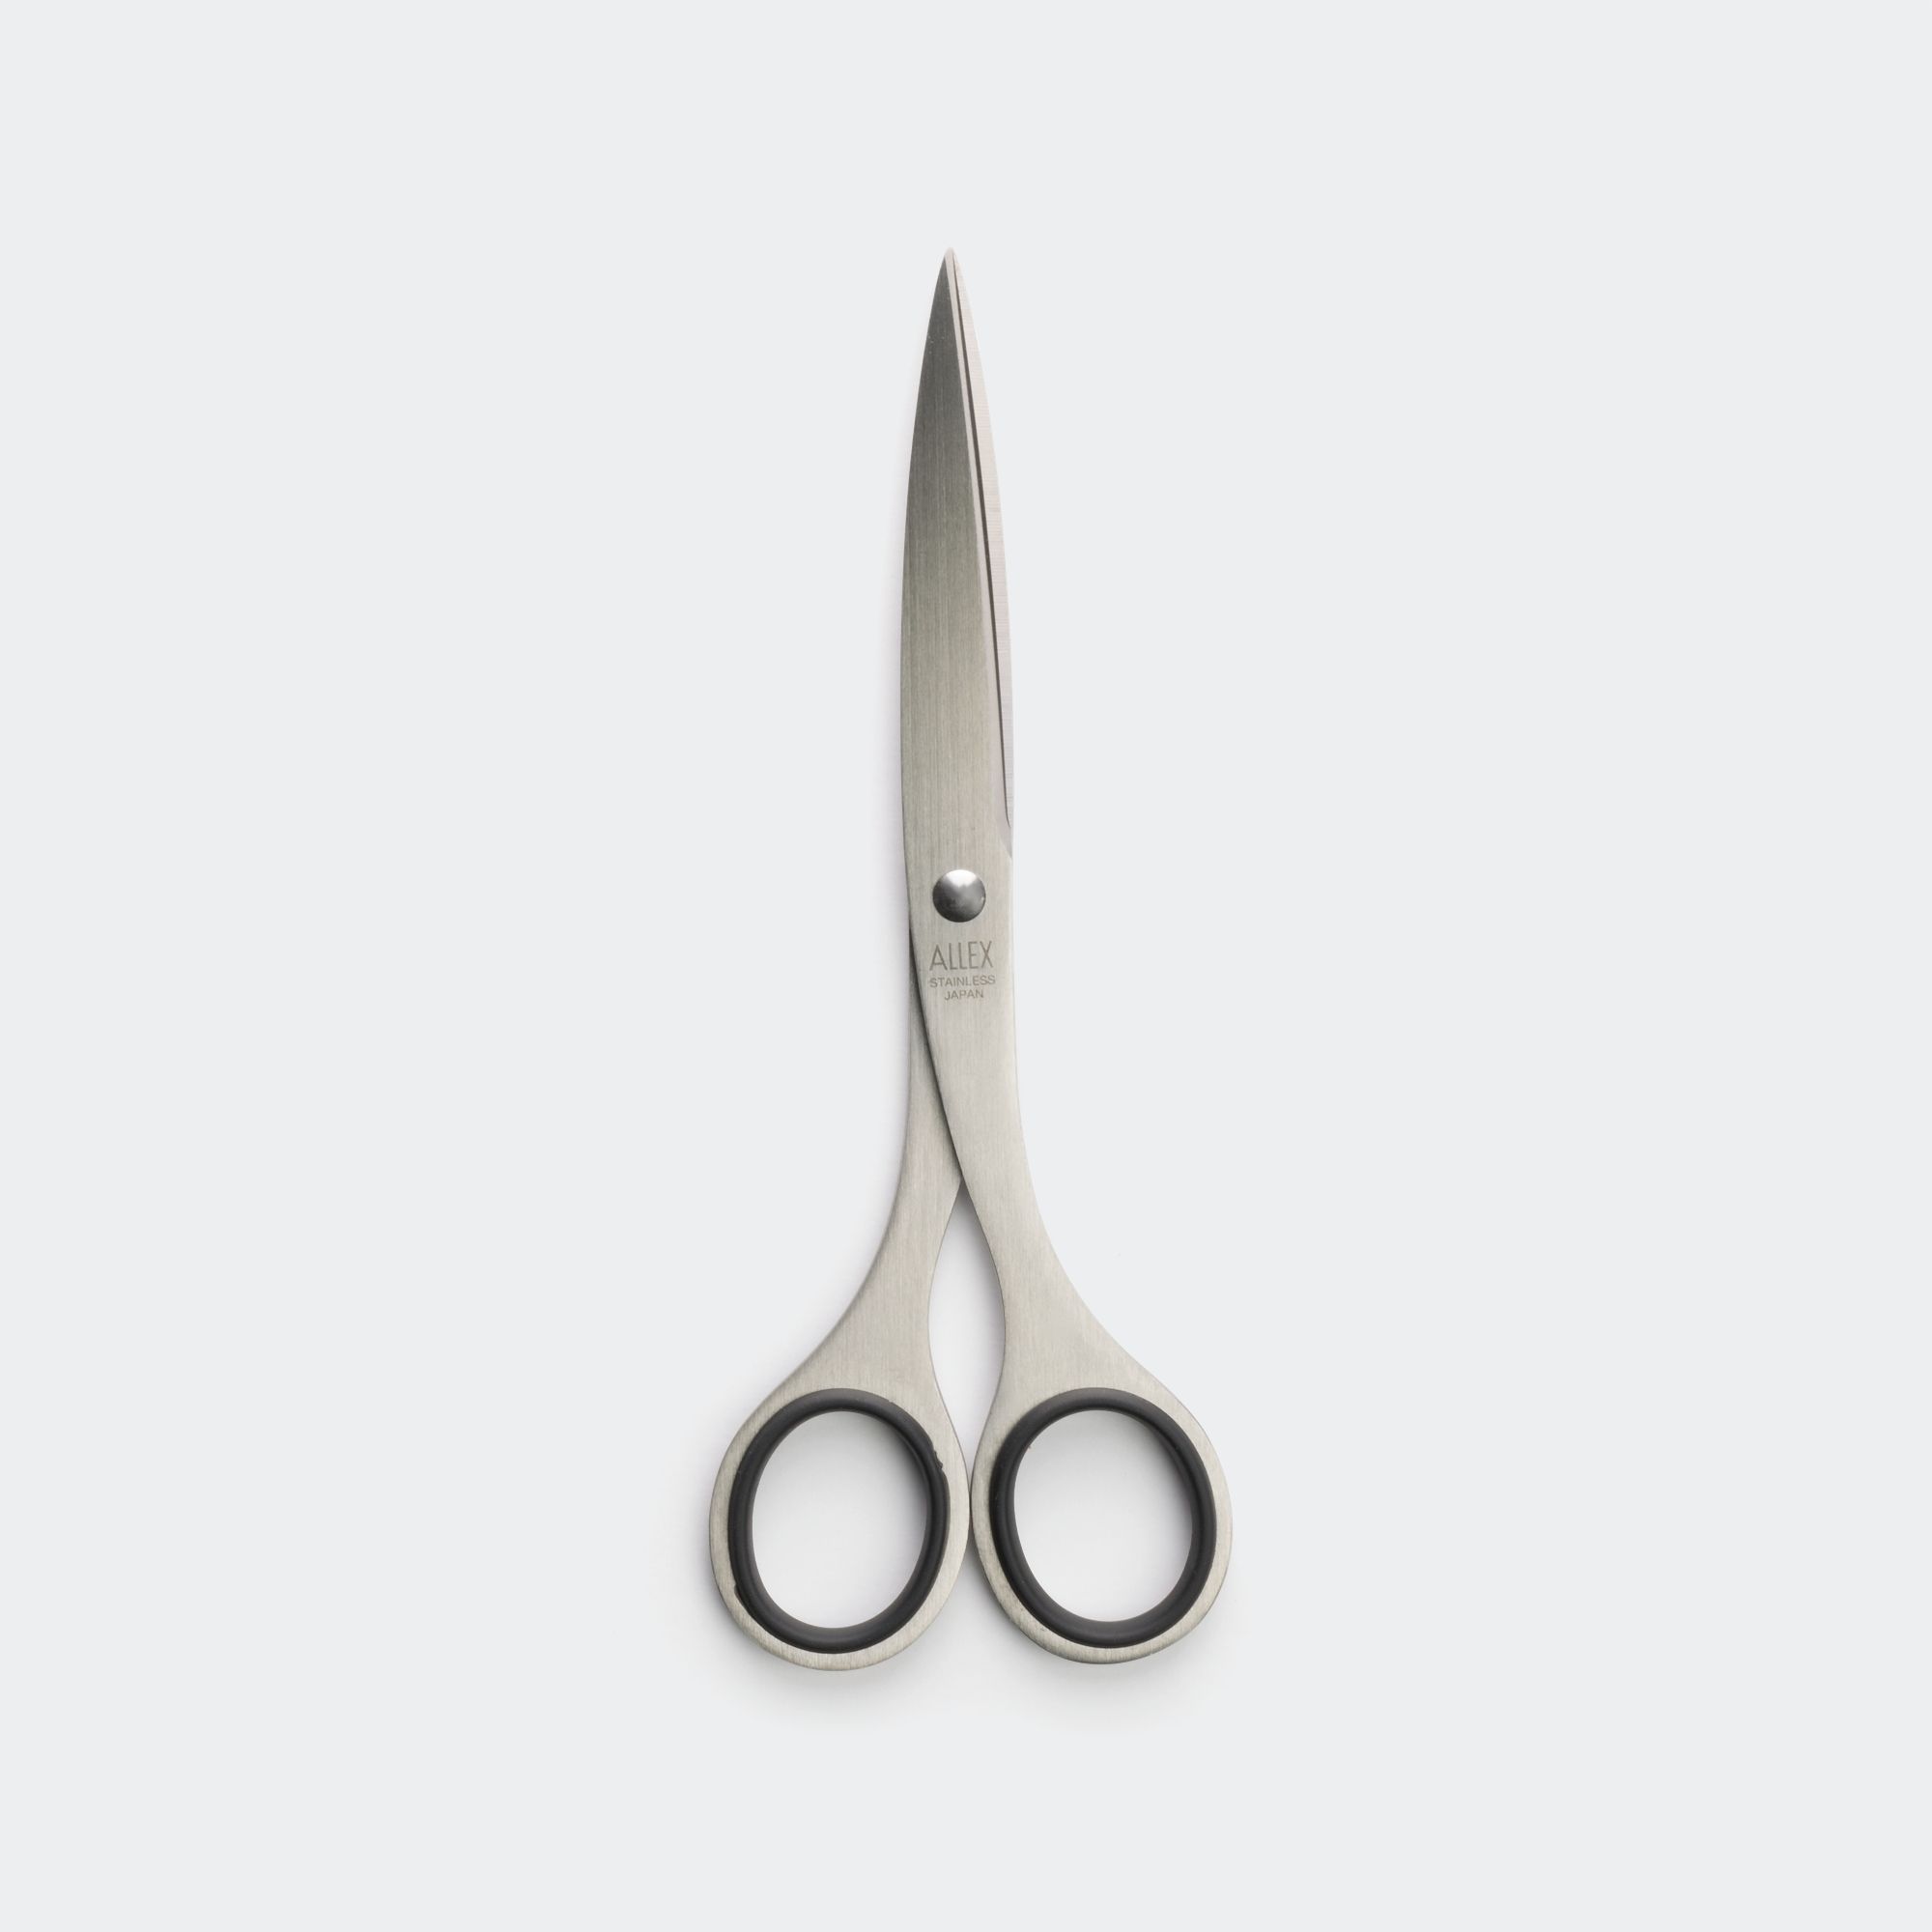  ALLEX Japanese Office Scissors for Desk, Small 5.3 All Purpose  Scissors, Made in JAPAN, All Metal Sharp Japanese Stainless Steel Blade  with Non-Slip Soft Ring, Black : Office Products